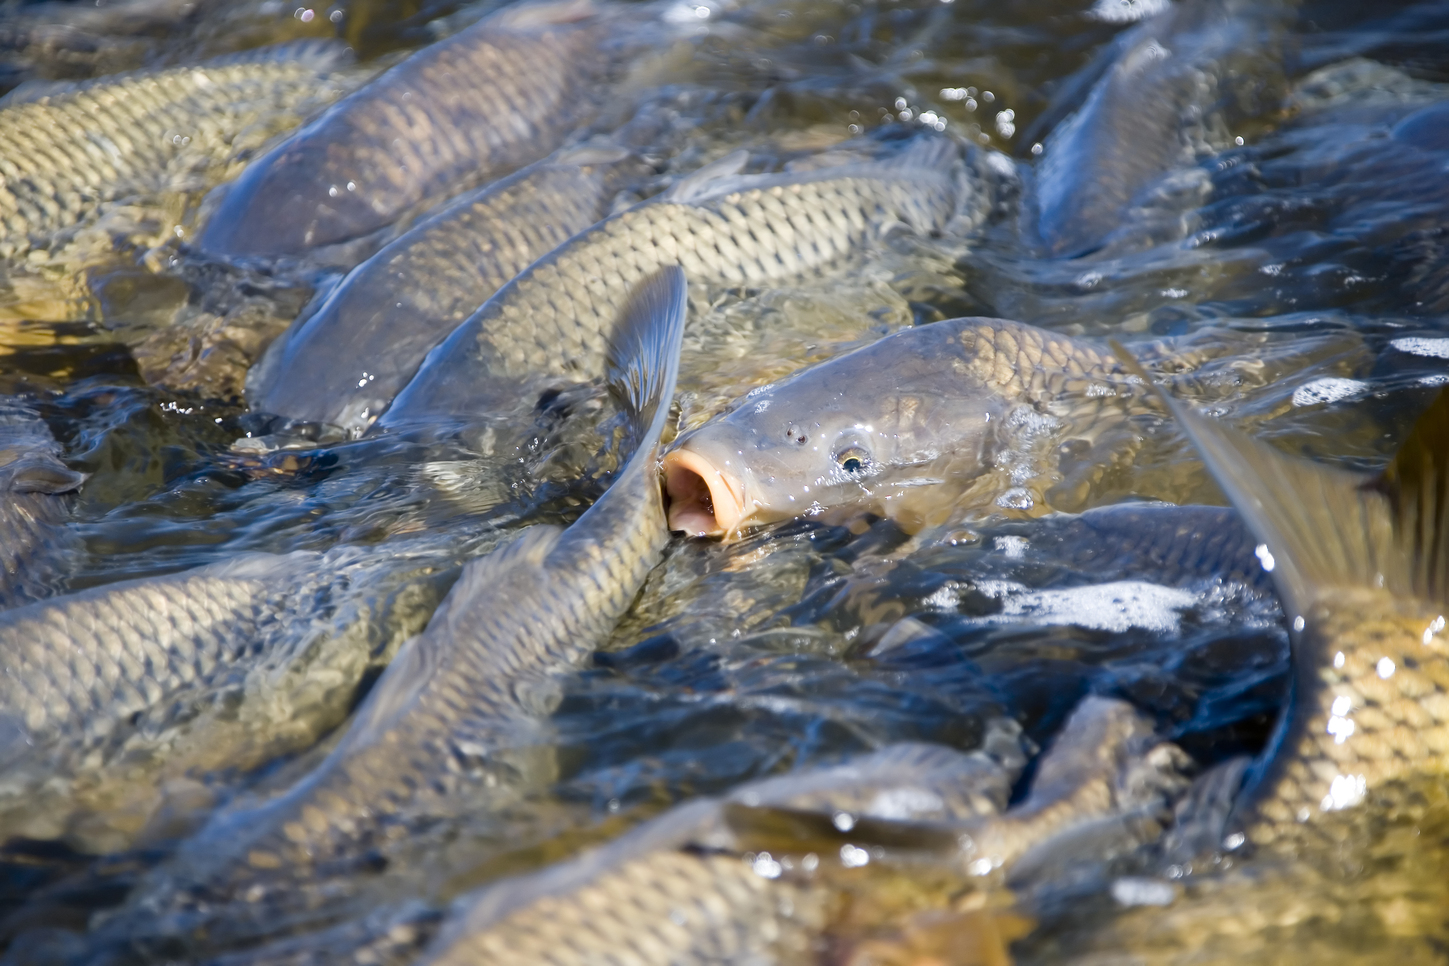 A combination of control methods could be used to tackle carp Benjamin F. Image: Haith/Shutterstock.com